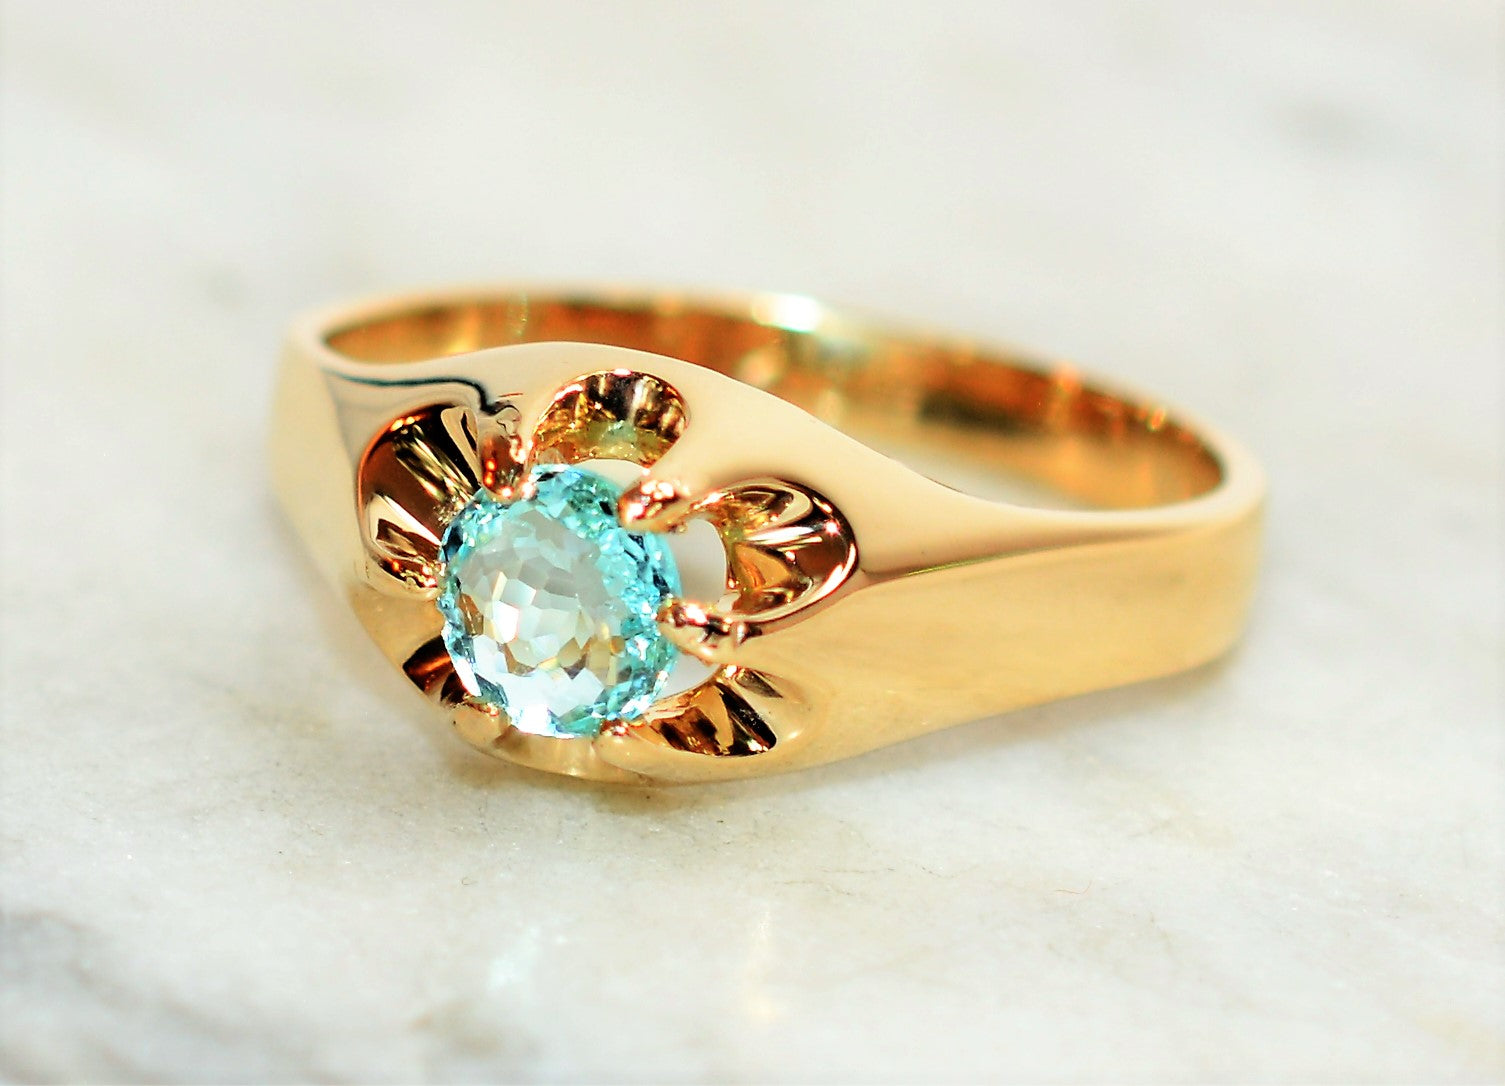 Natural Paraiba Tourmaline Ring 14K Solid Gold .52ct Men's Ring Solitaire Ring Statement Ring Gemstone Ring Estate Ring Fine Jewellery